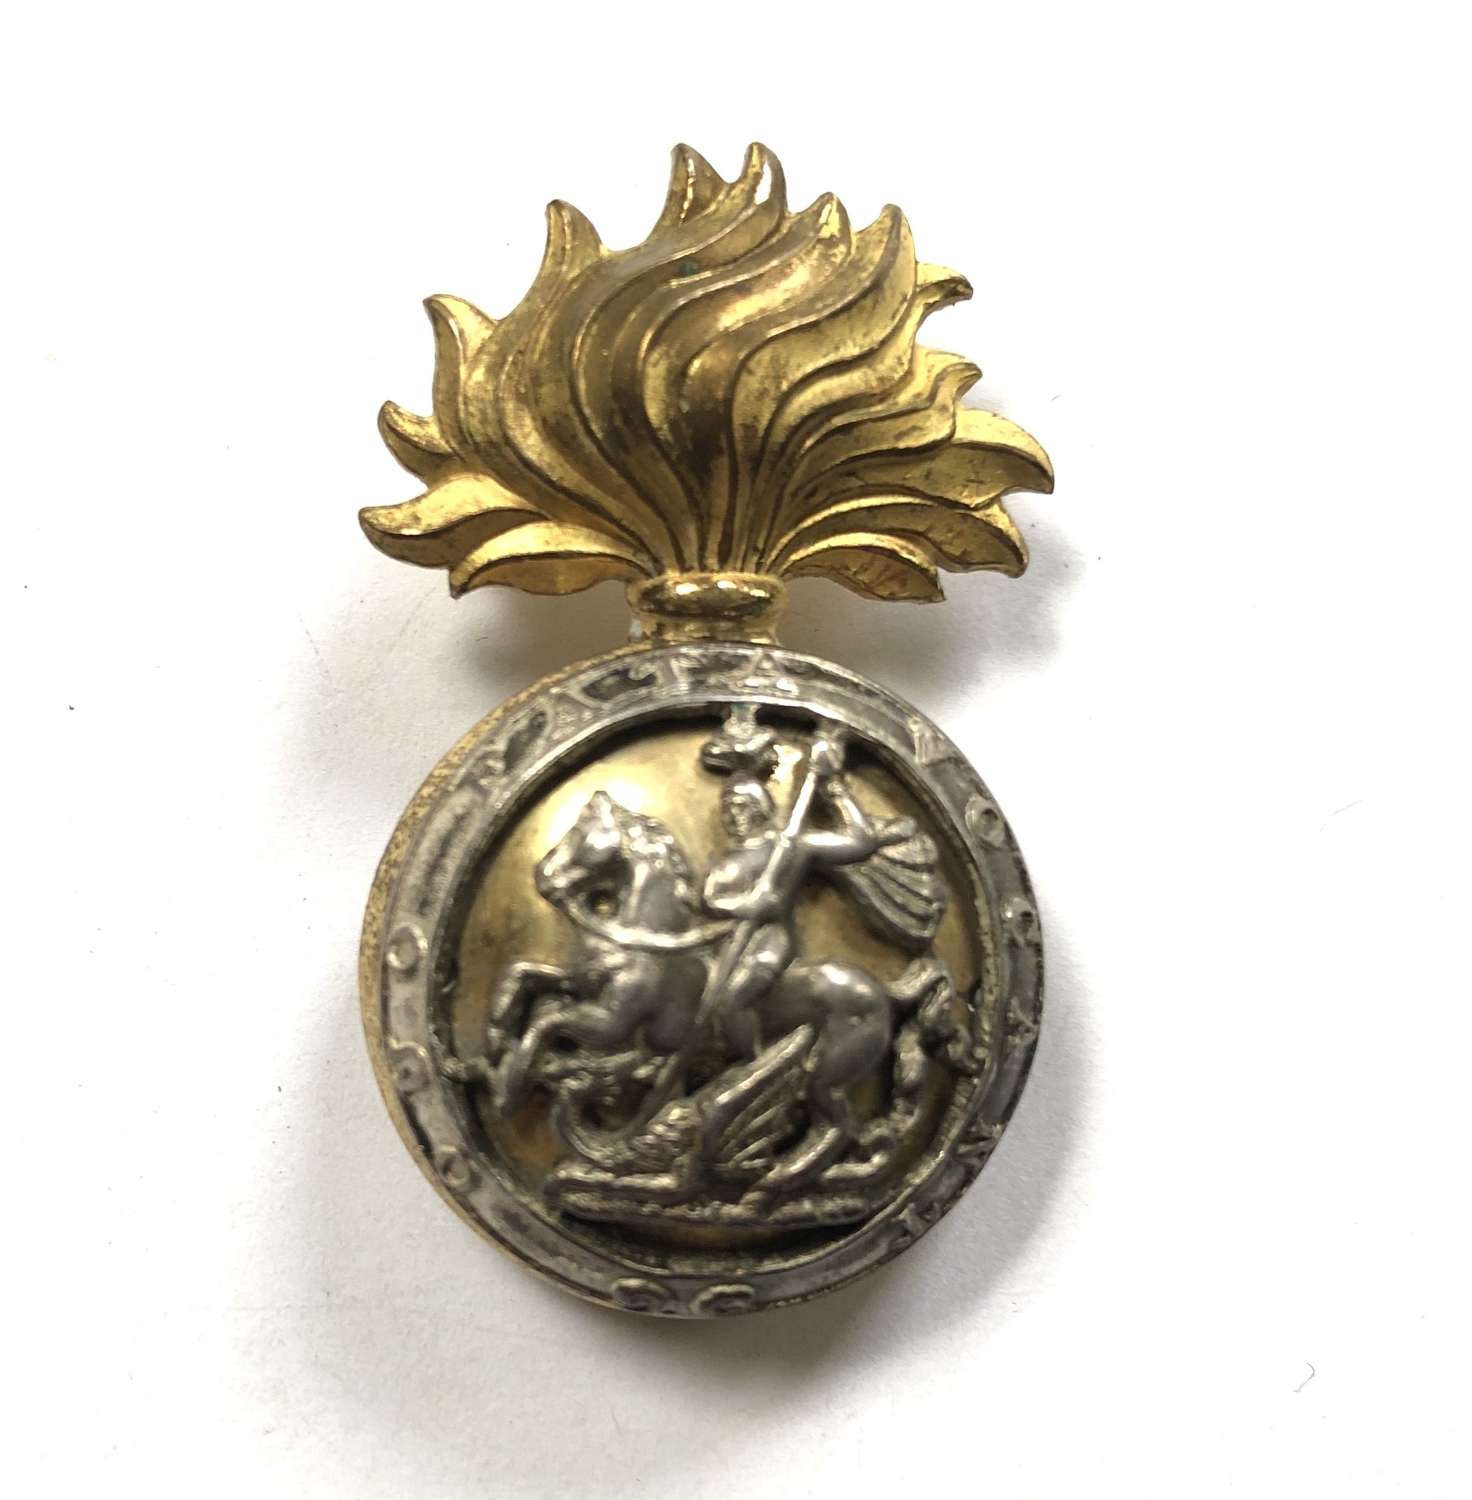 Royal Northumberland Fusiliers Officer's beret badge c1936-59